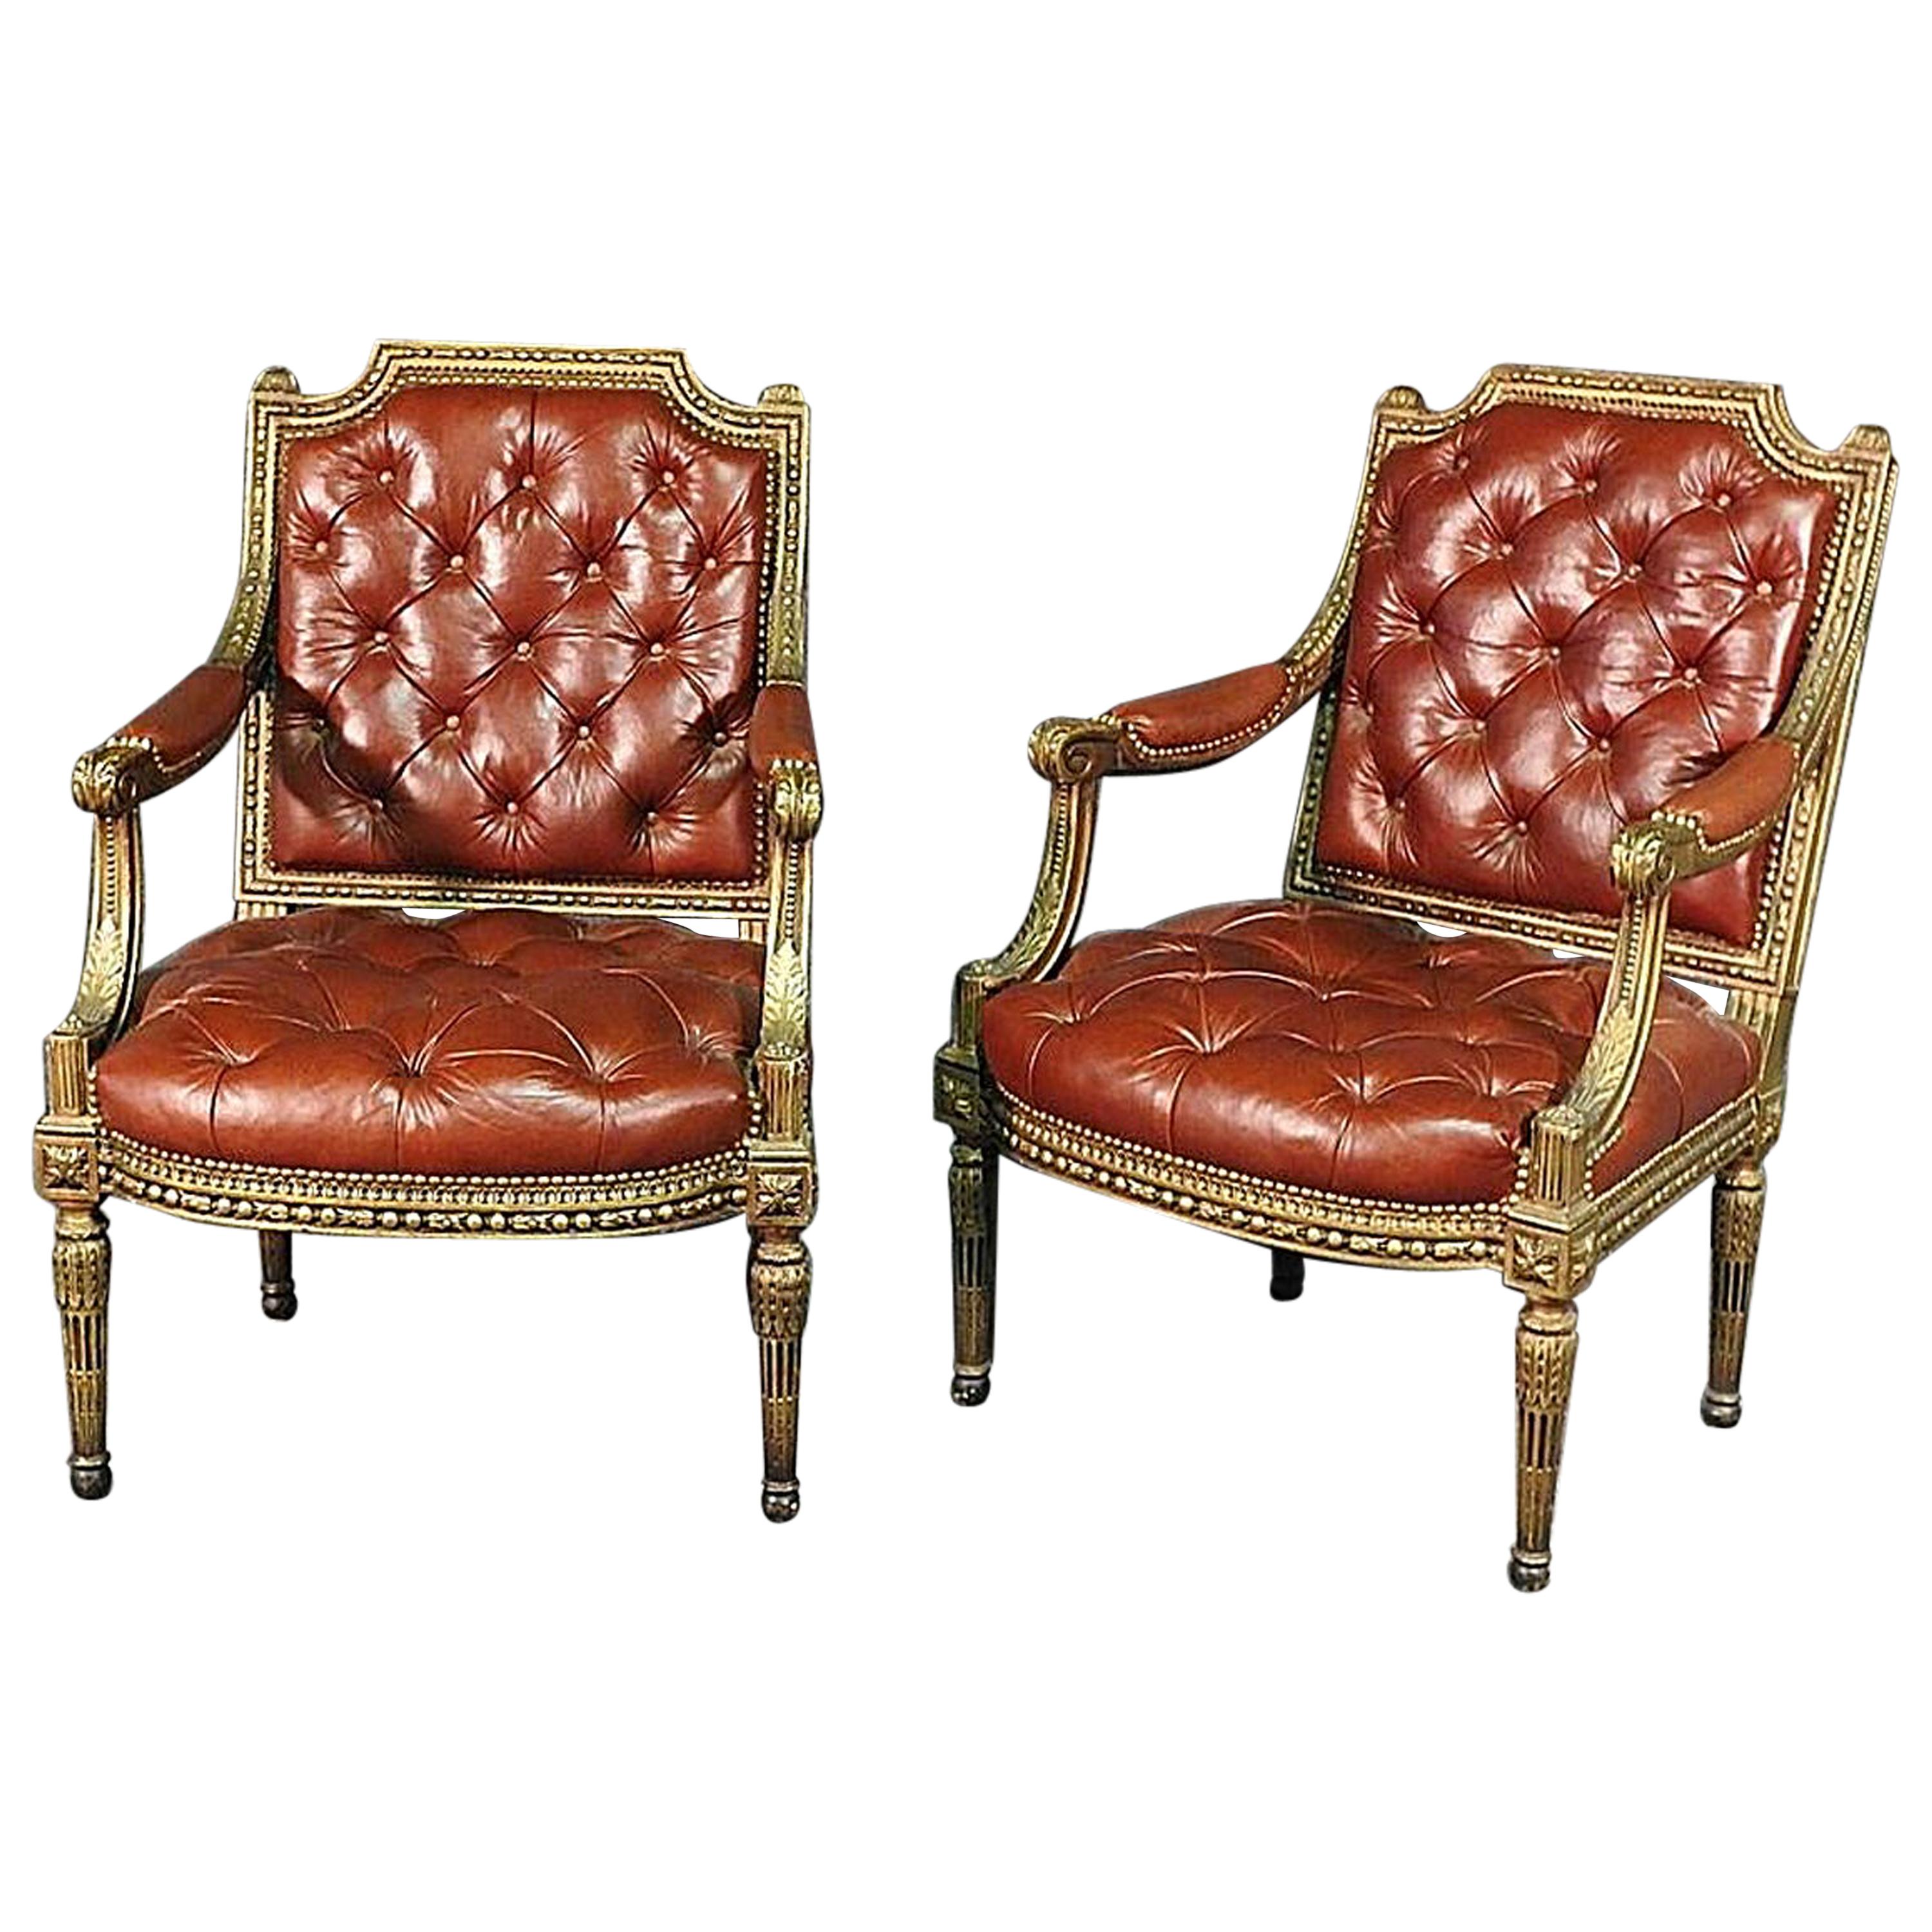 Pair of Gilded Carved Tobacco Brown Leather Tufted Fauteuil Armchairs circa 1920